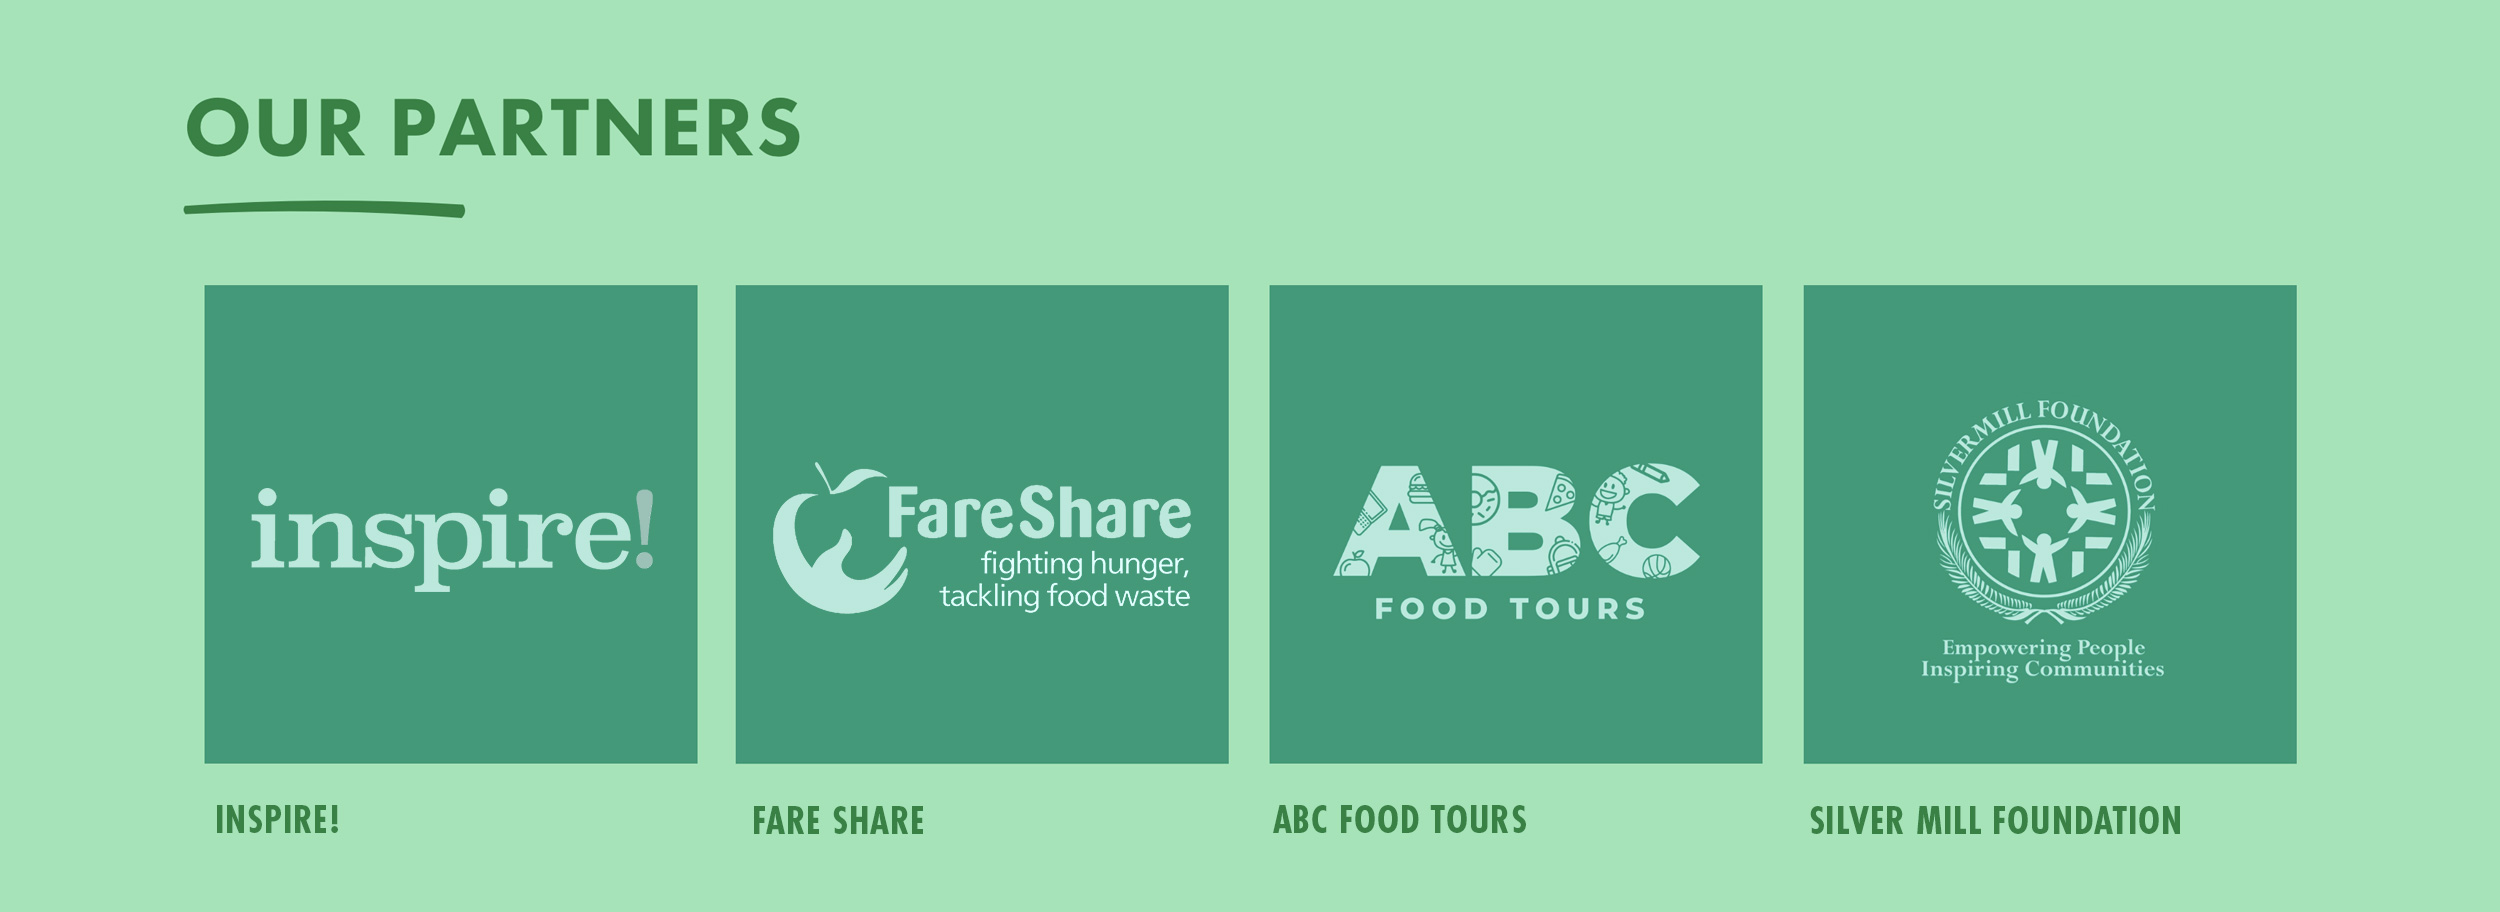 Our partners: Inspire!, Fare Share, ABC Food Tours, Silver Mill Foundation